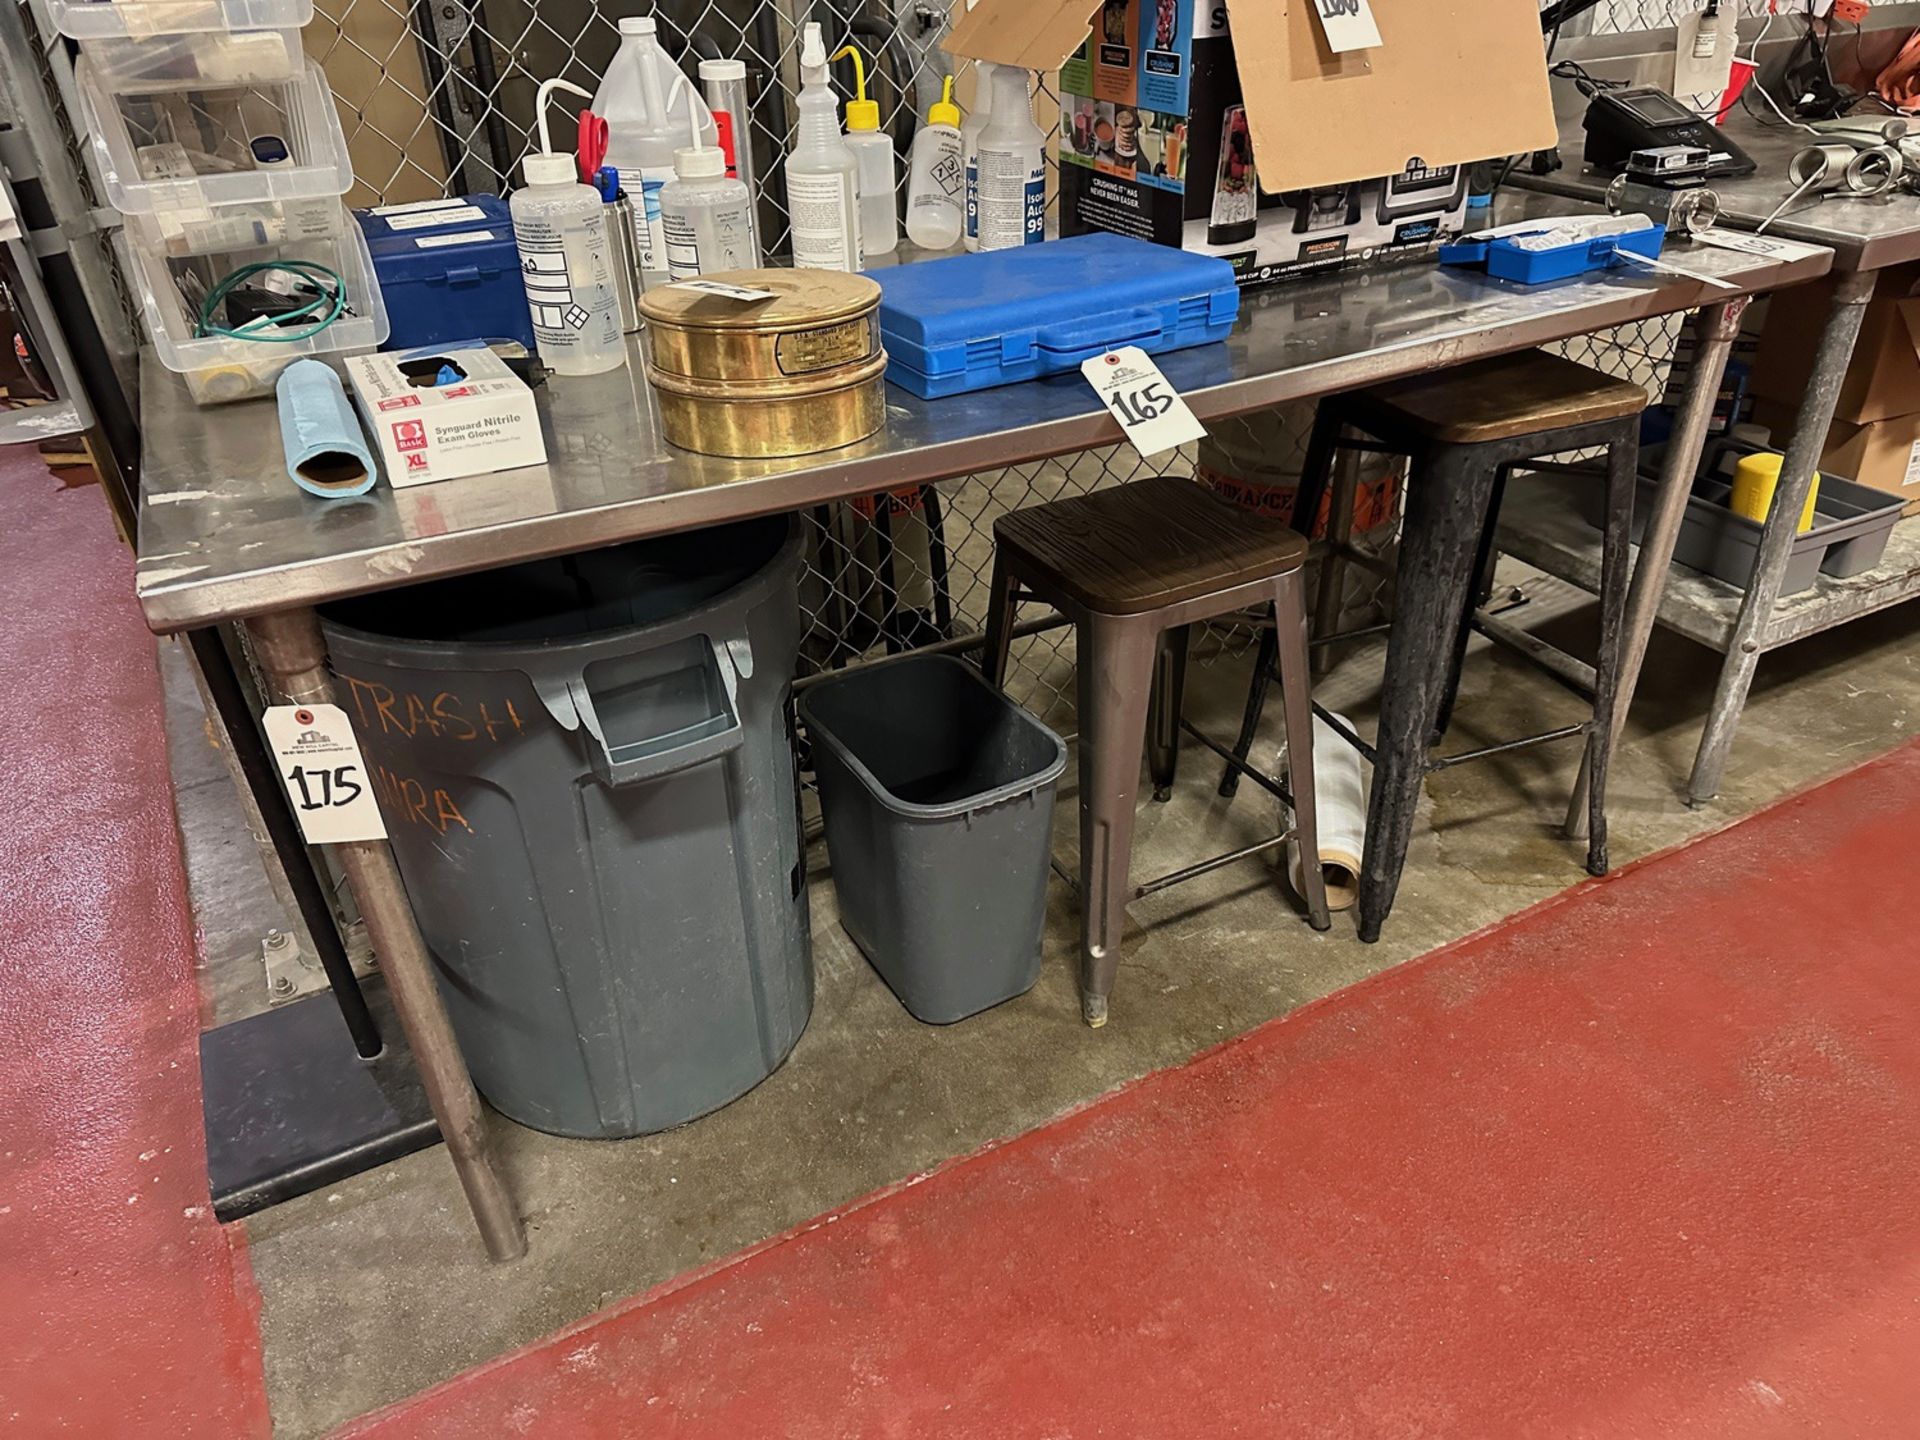 Stainless Steel Table (Approx. 30" x 6') (No Contents) | Rig Fee $45